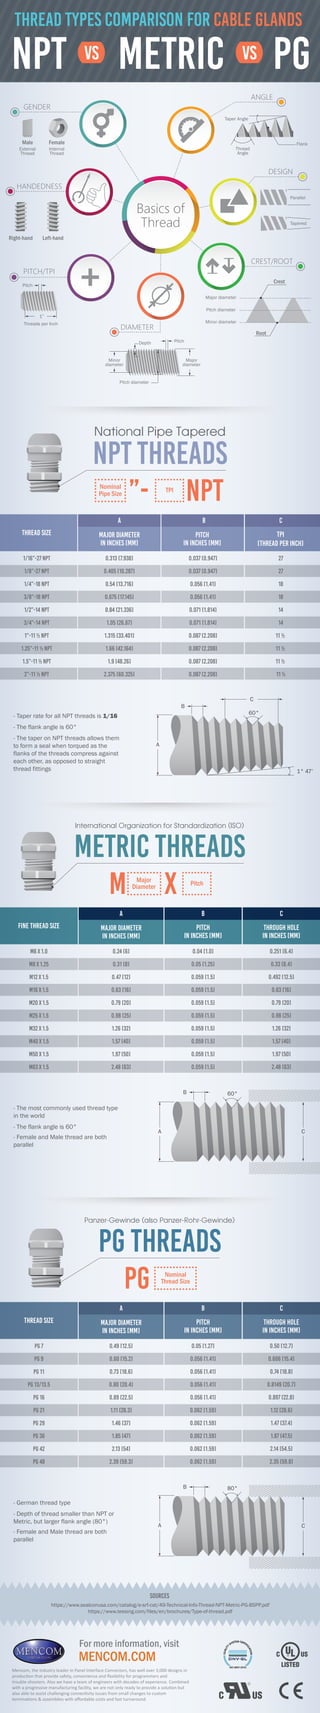 THREAD types COMPARISON for CAble Glands
NPT
NPT Threads
metric PGvs vs
Basics of
Thread
GENDER
HANDEDNESS
DIAMETER
Internal
Thread
External
Thread
Depth
Minor
diameter
Pitch diameter
Major
diameter
Pitch
Crest
Root
Major diameter
Pitch diameter
Minor diameter
FemaleMale
Left-handRight-hand
DESIGN
ANGLE
PITCH/TPI
CREST/ROOT
Pitch
1”
Threads per Inch
Parallel
Thread
Angle
Flank
Taper Angle
Tapered
National Pipe Tapered
major diameter
in inches [mm]
Pitch
in inches [mm]
TPI
[Thread per inch]
1/16”-27 NPT
1/8”-27 NPT
1/4”-18 NPT
3/8”-18 NPT
1/2”-14 NPT
3/4”-14 NPT
1”-11 1⁄2 NPT
1.5”-11 1⁄2 NPT
1.25”-11 1⁄2 NPT
2”-11 1⁄2 NPT
0.313 [7.938]
0.405 [10.287]
0.54 [13.716]
0.675 [17.145]
0.84 [21.336]
1.05 [26.67]
1.315 [33.401]
1.9 [48.26]
1.66 [42.164]
2.375 [60.325]
0.037 [0.947]
0.037 [0.947]
0.056 [1.41]
0.056 [1.41]
0.071 [1.814]
0.071 [1.814]
0.087 [2.208]
0.087 [2.208]
0.087 [2.208]
0.087 [2.208]
27
27
18
18
14
14
11 1⁄2
11 1⁄2
11 1⁄2
11 1⁄2
Thread size
- Taper rate for all NPT threads is 1/16
- The flank angle is 60°
- The taper on NPT threads allows them
to form a seal when torqued as the
flanks of the threads compress against
each other, as opposed to straight
thread fittings
Nominal
Pipe Size
TPI
”- NPT
B
A
C
60°
1° 47’
A B C
Metric Threads
International Organization for Standardization (ISO)
major diameter
in inches [mm]
Pitch
in inches [mm]
ﬁne Thread size
- The most commonly used thread type
in the world
- The flank angle is 60°
- Female and Male thread are both
parallel
Major
Diameter
M x Pitch
A B
M6 x 1.0
M8 x 1.25
M12 x 1.5
M16 X 1.5
M20 X 1.5
M25 X 1.5
M32 X 1.5
M40 X 1.5
M50 X 1.5
M63 X 1.5
0.24 [6]
0.31 [8]
0.47 [12]
0.63 [16]
0.79 [20]
0.98 [25]
1.26 [32]
1.57 [40]
1.97 [50]
2.48 [63]
0.04 [1.0]
0.05 [1.25]
0.059 [1.5]
0.059 [1.5]
0.059 [1.5]
0.059 [1.5]
0.059 [1.5]
0.059 [1.5]
0.059 [1.5]
0.059 [1.5]
0.251 [6.4]
0.33 [8.4]
0.492 [12.5]
0.63 [16]
0.79 [20]
0.98 [25]
1.26 [32]
1.57 [40]
1.97 [50]
2.48 [63]
Through Hole
in inches [mm]
C
B
A C
60°
PG Threads
Panzer-Gewinde (also Panzer-Rohr-Gewinde)
major diameter
in inches [mm]
Pitch
in inches [mm]
Thread size
- German thread type
- Depth of thread smaller than NPT or
Metric, but larger flank angle (80°)
- Female and Male thread are both
parallel
Nominal
Thread Size
PG
A B
PG 7
PG 9
PG 11
PG 13/13.5
PG 16
PG 21
PG 29
PG 36
PG 42
PG 48
0.49 [12.5]
0.60 [15.2]
0.73 [18.6]
0.80 [20.4]
0.89 [22.5]
1.11 [28.3]
1.46 [37]
1.85 [47]
2.13 [54]
2.39 [59.3]
0.05 [1.27]
0.056 [1.41]
0.056 [1.41]
0.056 [1.41]
0.056 [1.41]
0.062 [1.59]
0.062 [1.59]
0.062 [1.59]
0.062 [1.59]
0.062 [1.59]
0.50 [12.7]
0.606 [15.4]
0.74 [18.8]
0.8149 [20.7]
0.897 [22.8]
1.12 [28.6]
1.47 [37.4]
1.87 [47.5]
2.14 [54.5]
2.35 [59.8]
Through Hole
in inches [mm]
C
B
A C
80°
Mencom, the industry leader in Panel Interface Connectors, has well over 3,000 designs in
produc�on that provide safety, convenience and ﬂexibility for programmers and
trouble-shooters. Also we have a team of engineers with decades of experience. Combined
with a progressive manufacturing facility, we are not only ready to provide a solu�on but
also able to assist challenging connec�vity issues from small changes to custom
termina�ons & assemblies with aﬀordable costs and fast turnaround.
MENCOM.COM
For more information, visit
SOURCES
https://www.sealconusa.com/catalog/e-srf-cat/49-Technical-Info-Thread-NPT-Metric-PG-BSPP.pdf
https://www.teesing.com/files/en/brochures/Type-of-thread.pdf
 